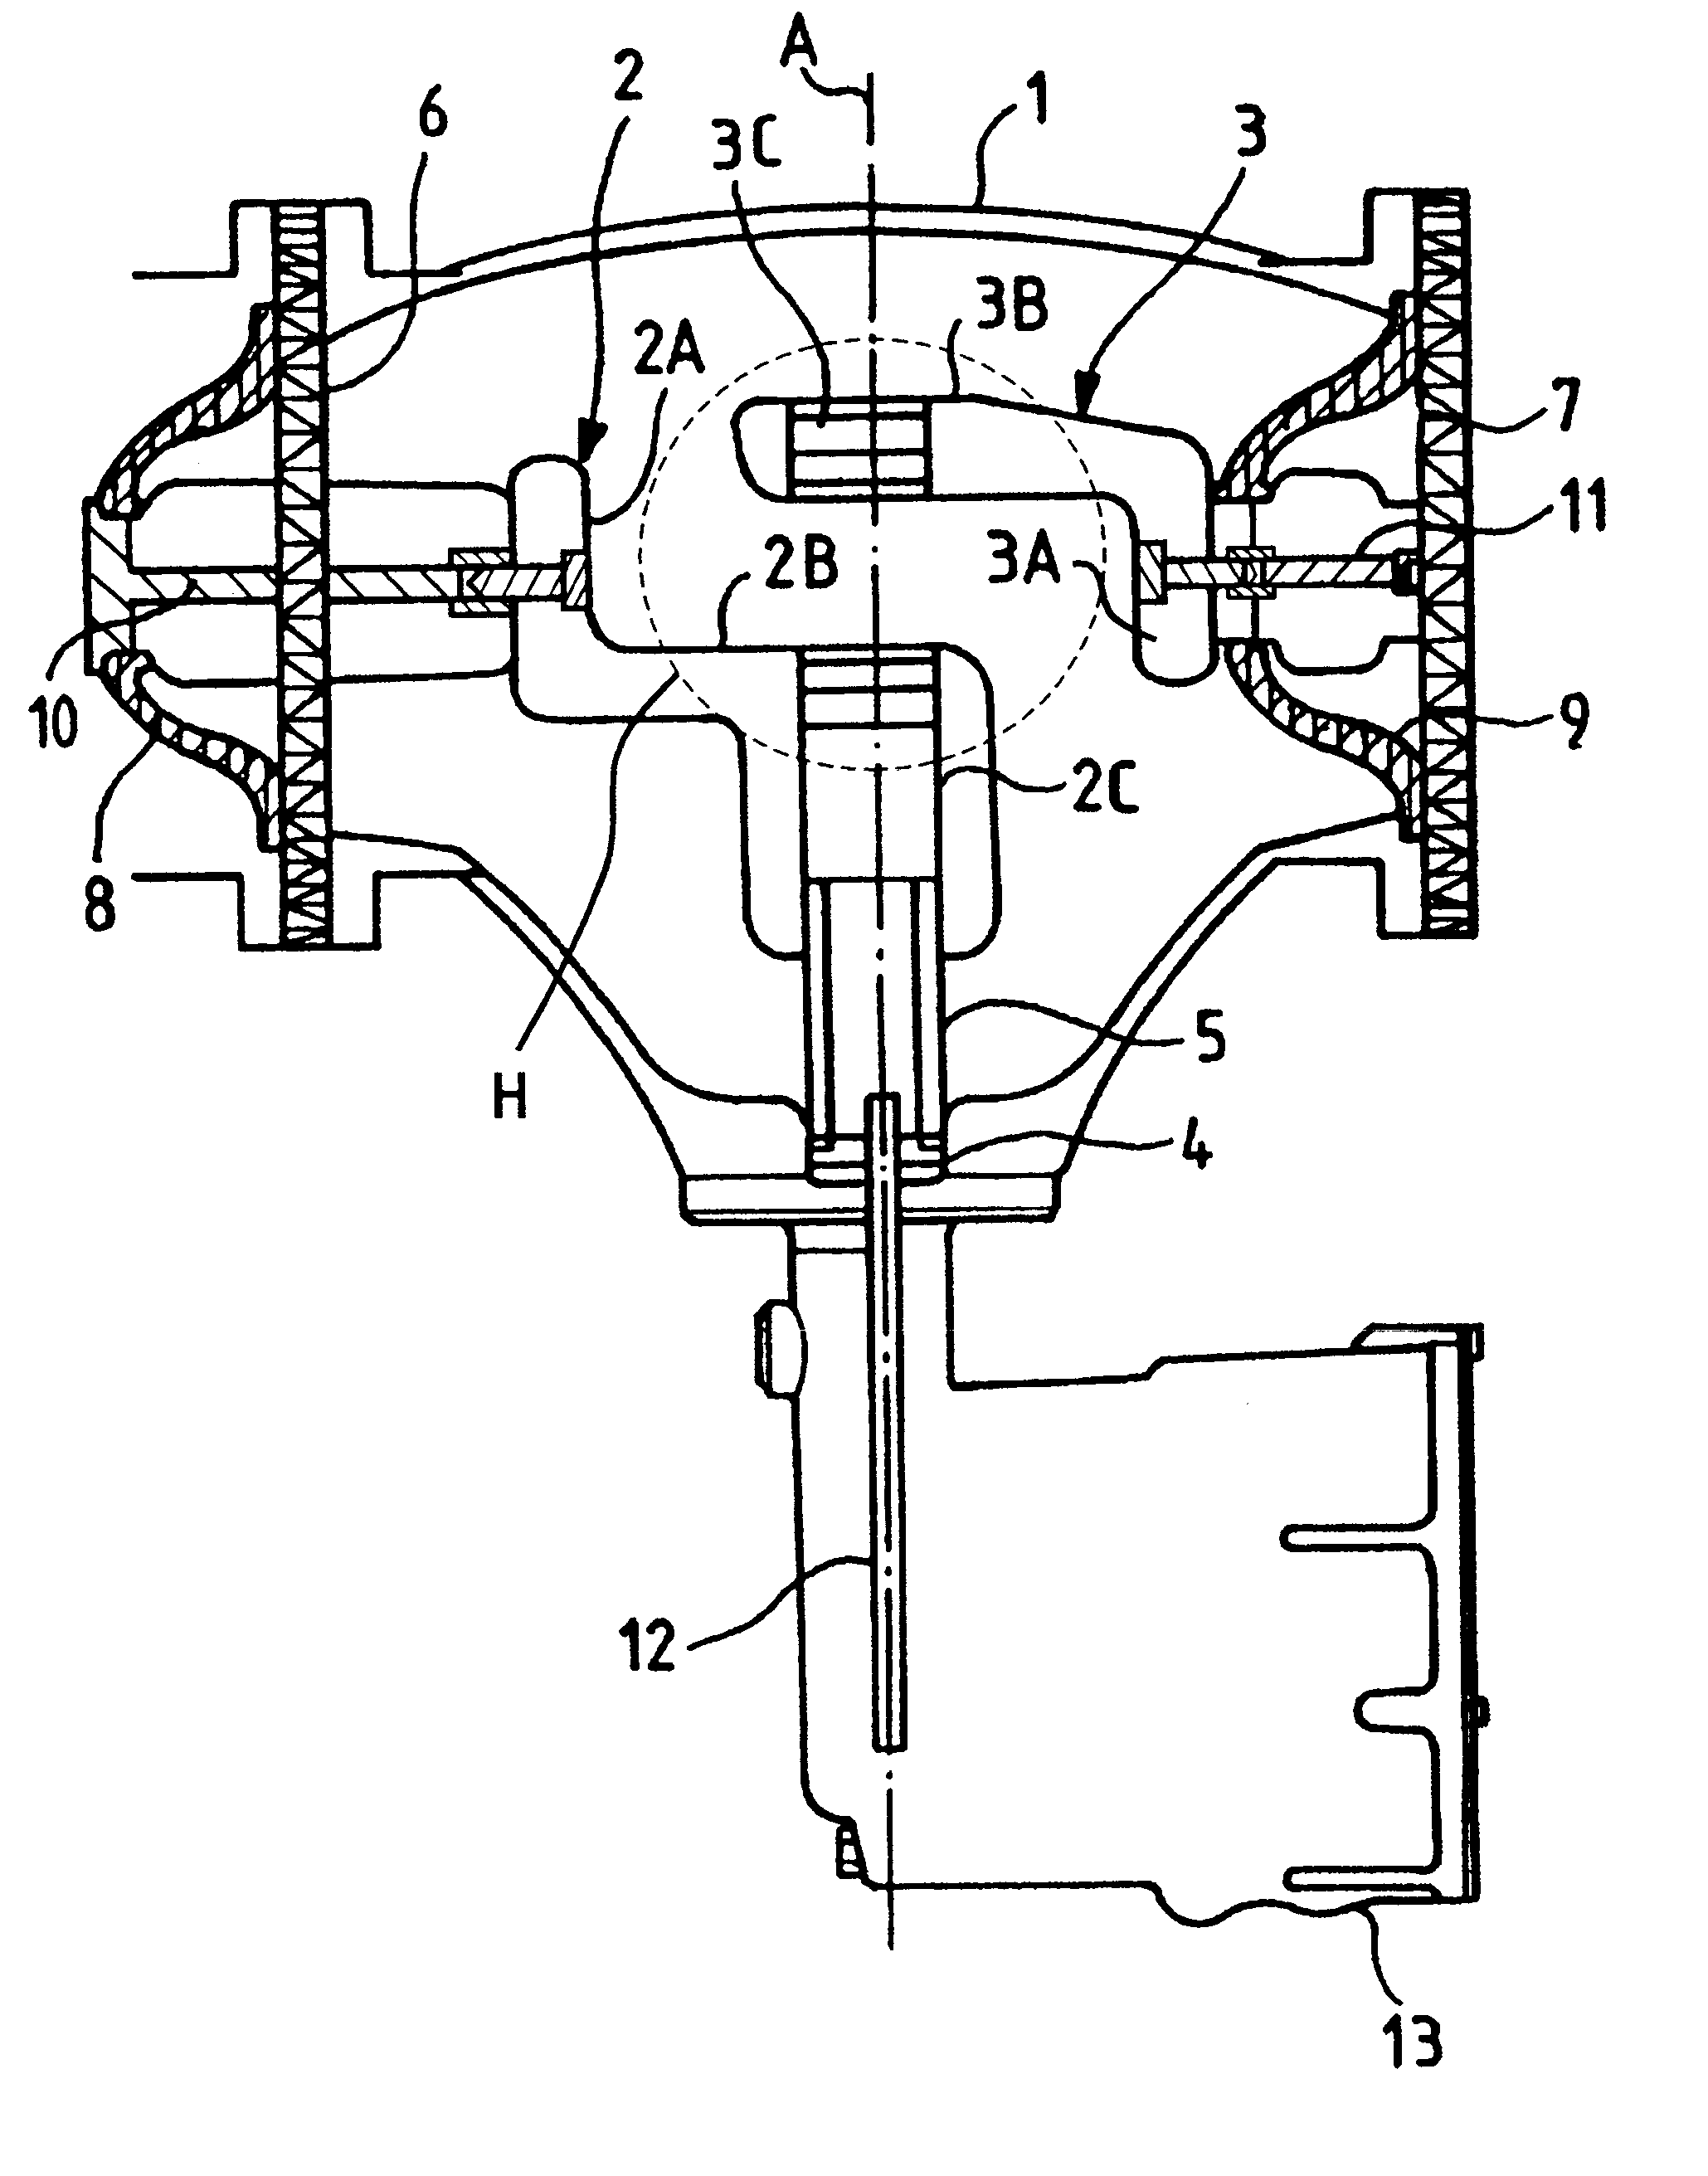 Three-position electrical switch having a switching element that is movable in axial translation